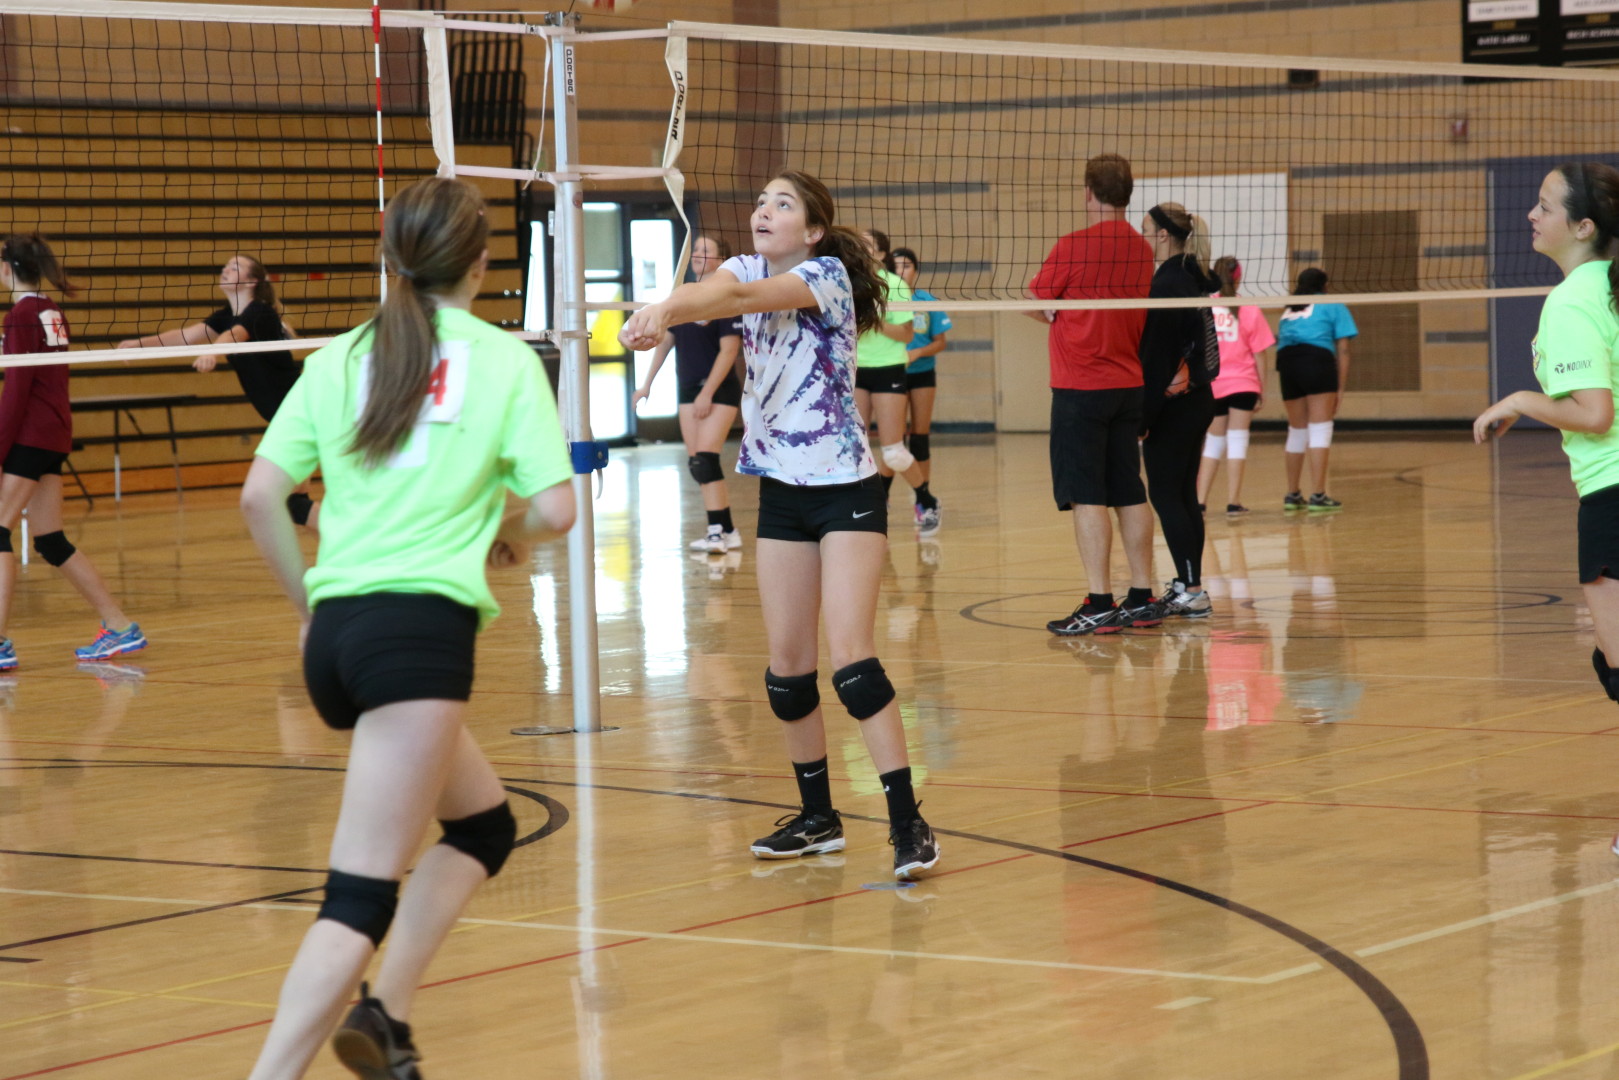 volleyball tryouts